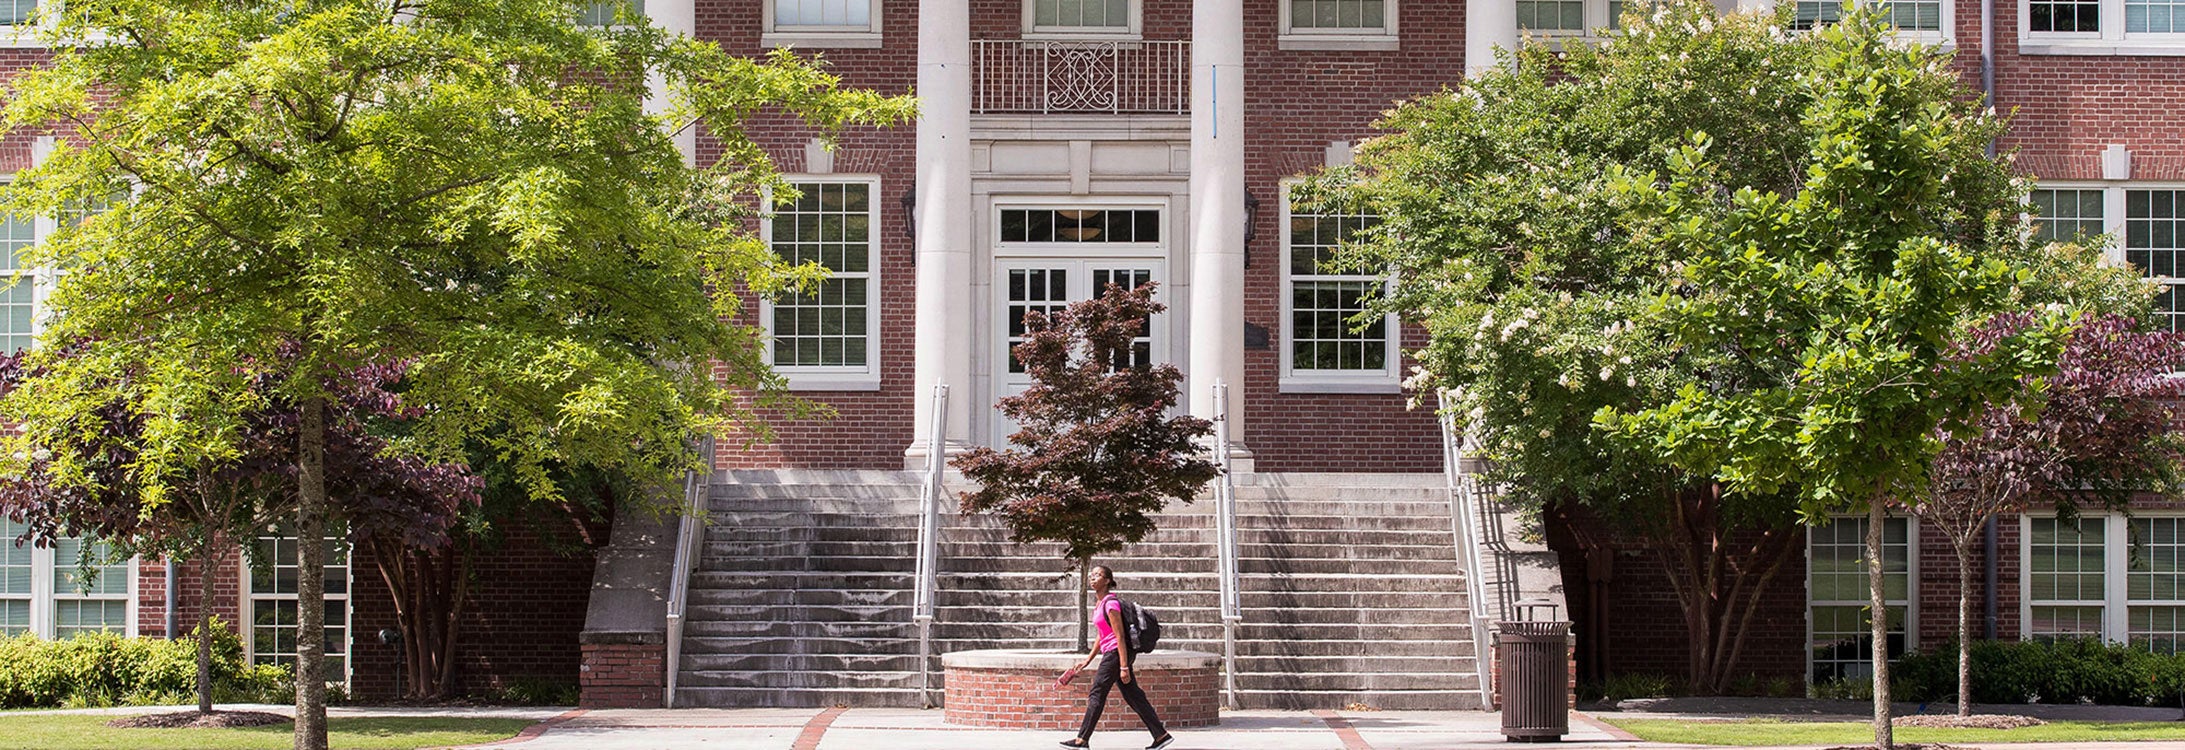 Image of one student walking in front of the Flanagan Building